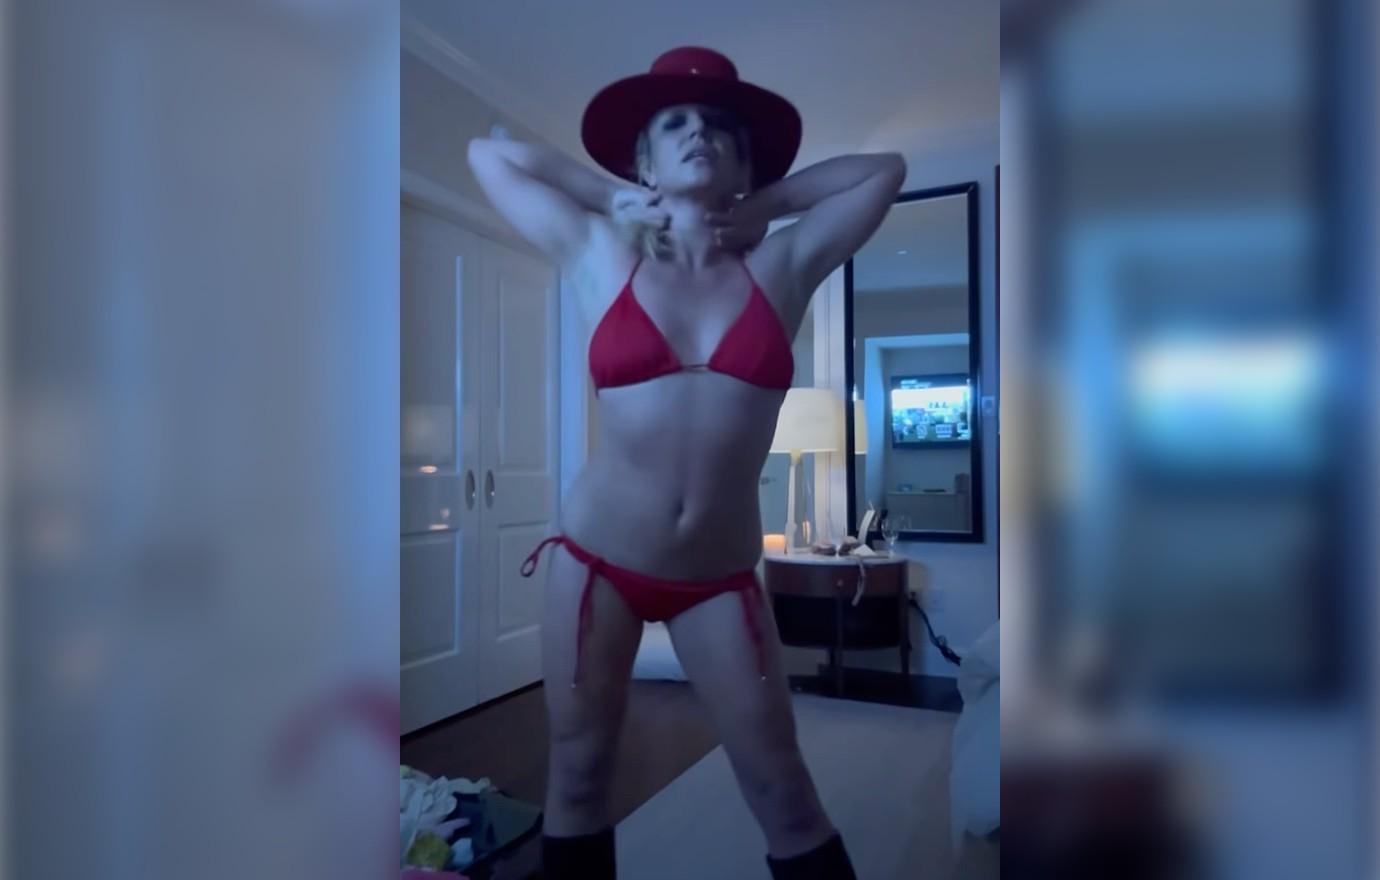 Britney Spears Shows Off Weird Dance Moves In Bizarre Video: Watch